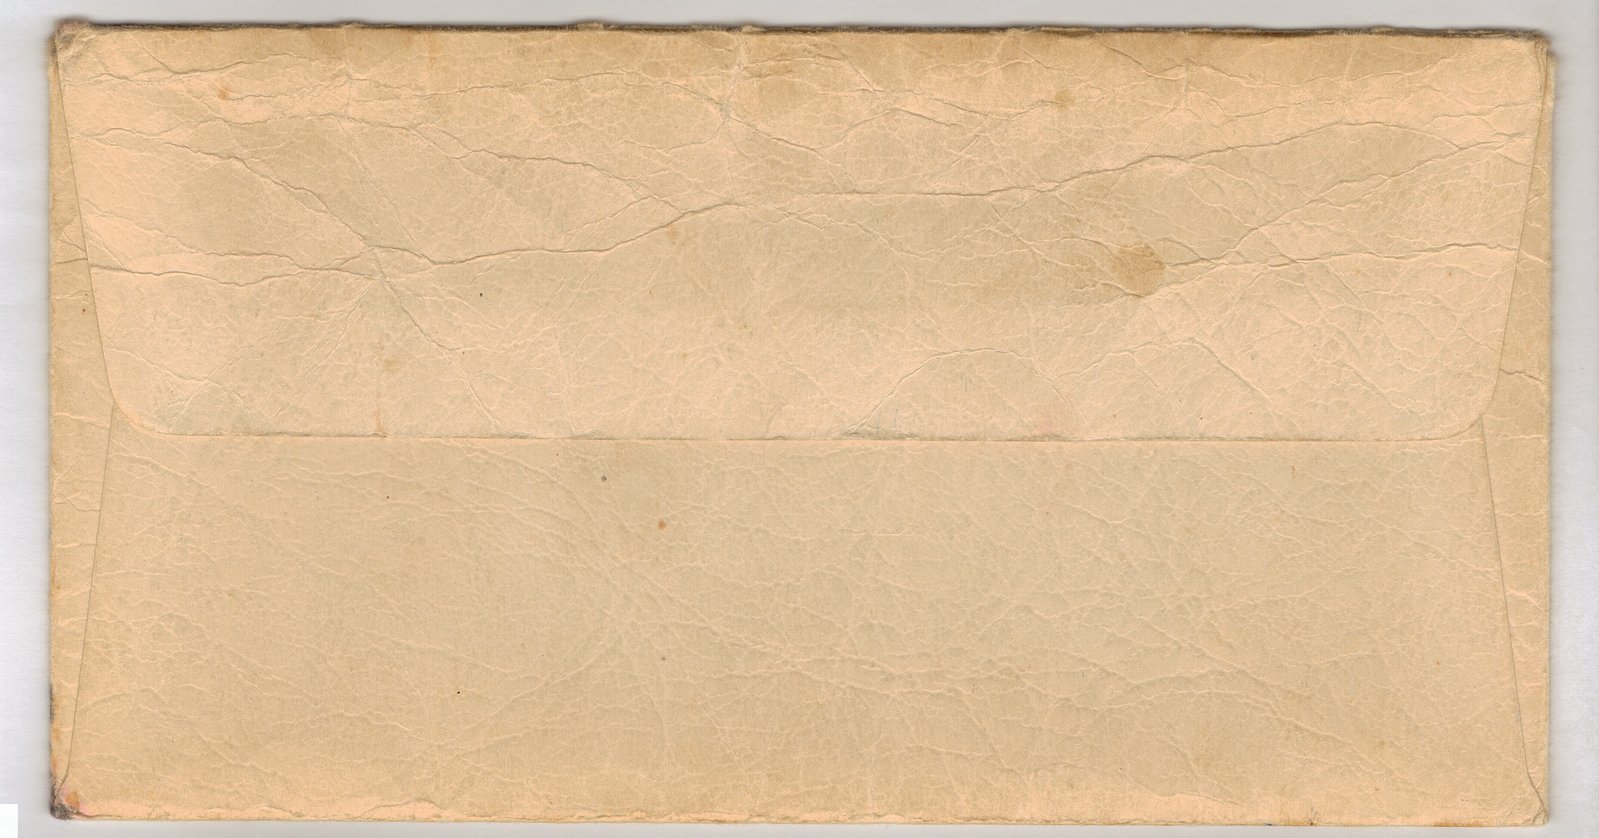 a beige torn paper envelope is shown in a box